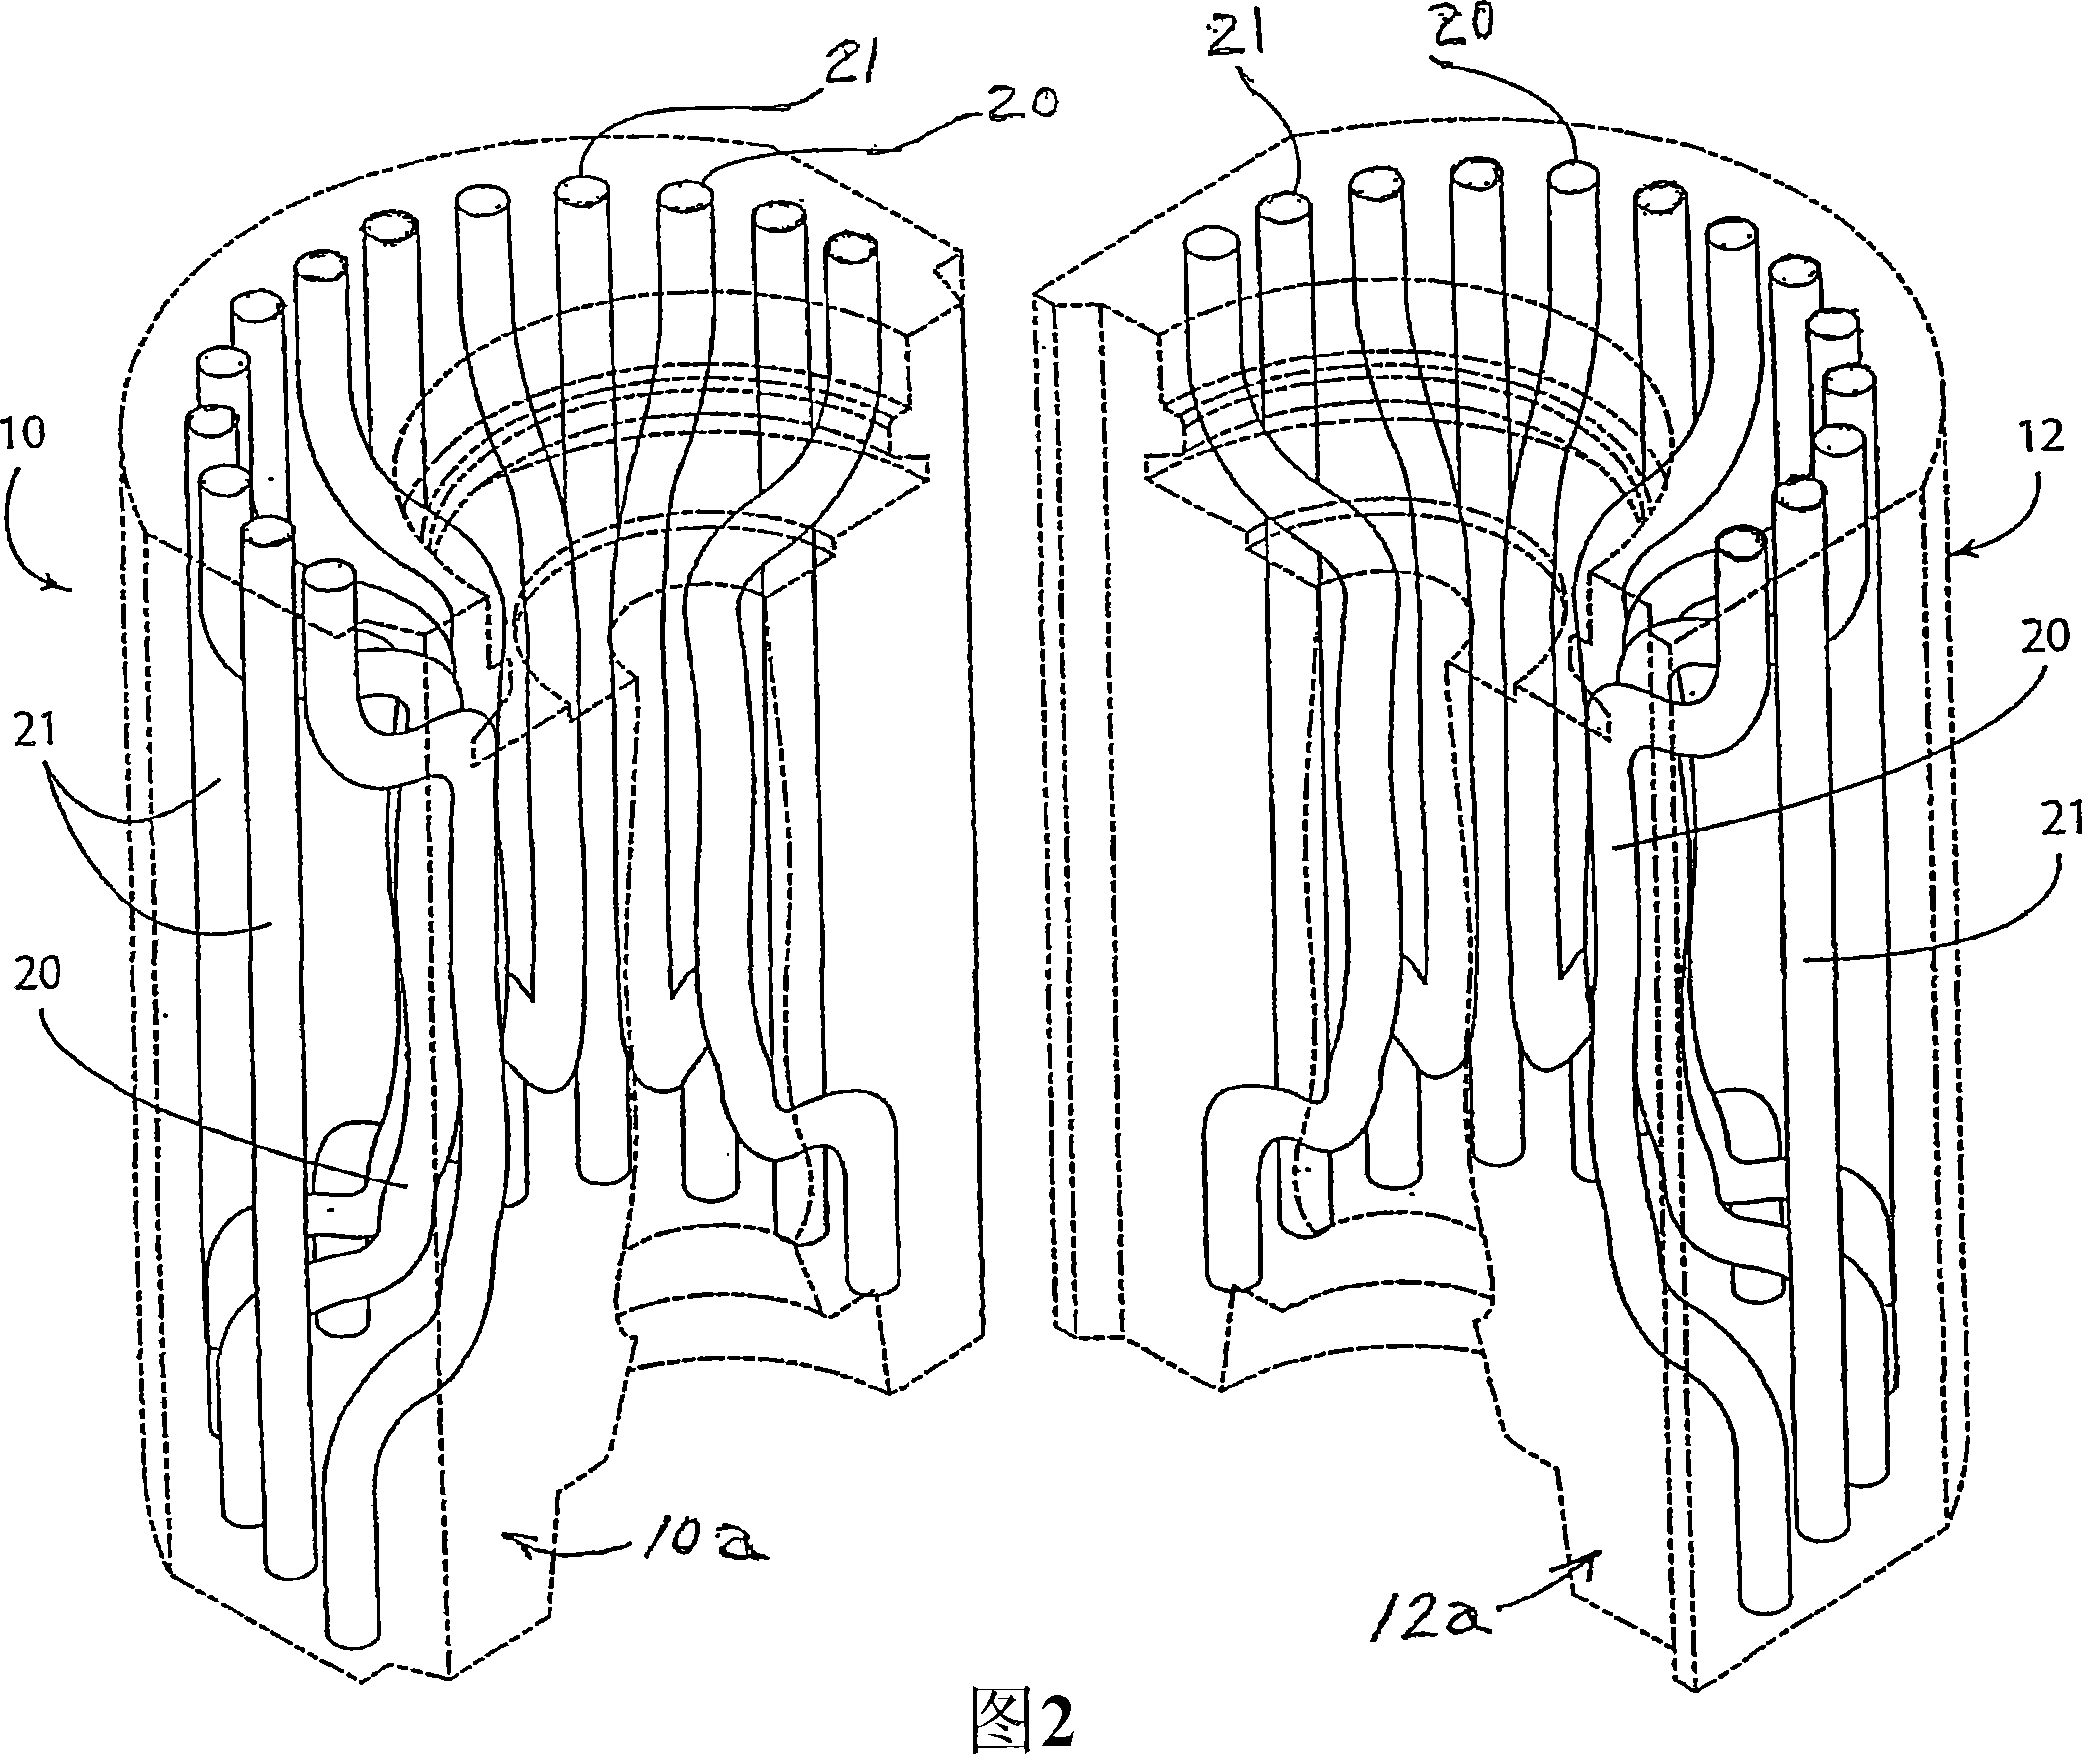 Glass-forming die and method